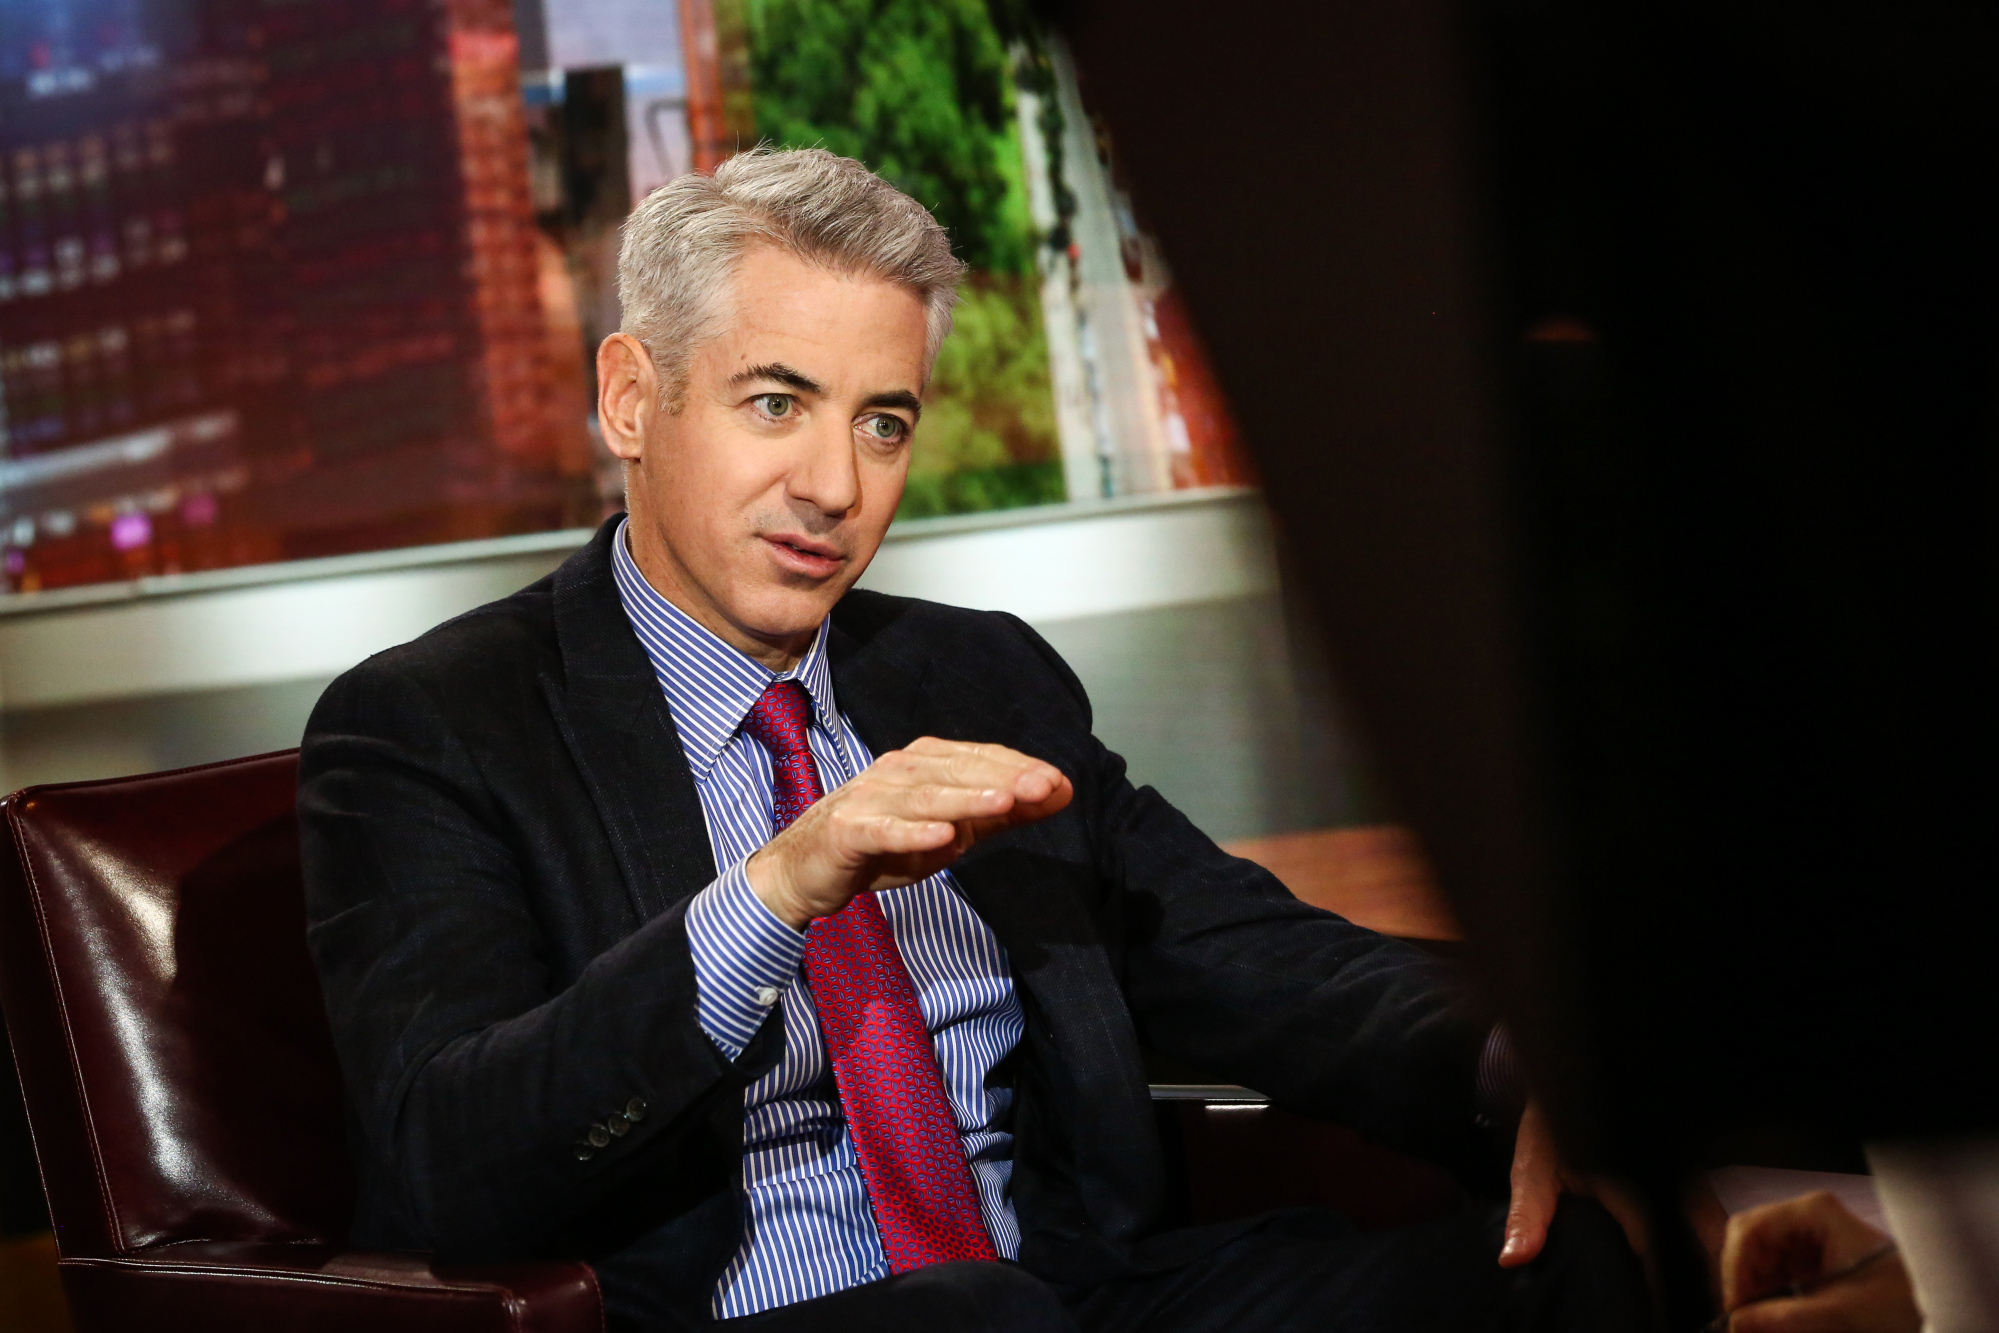 Bill Ackman speaks during an interview on Bloomberg Television.